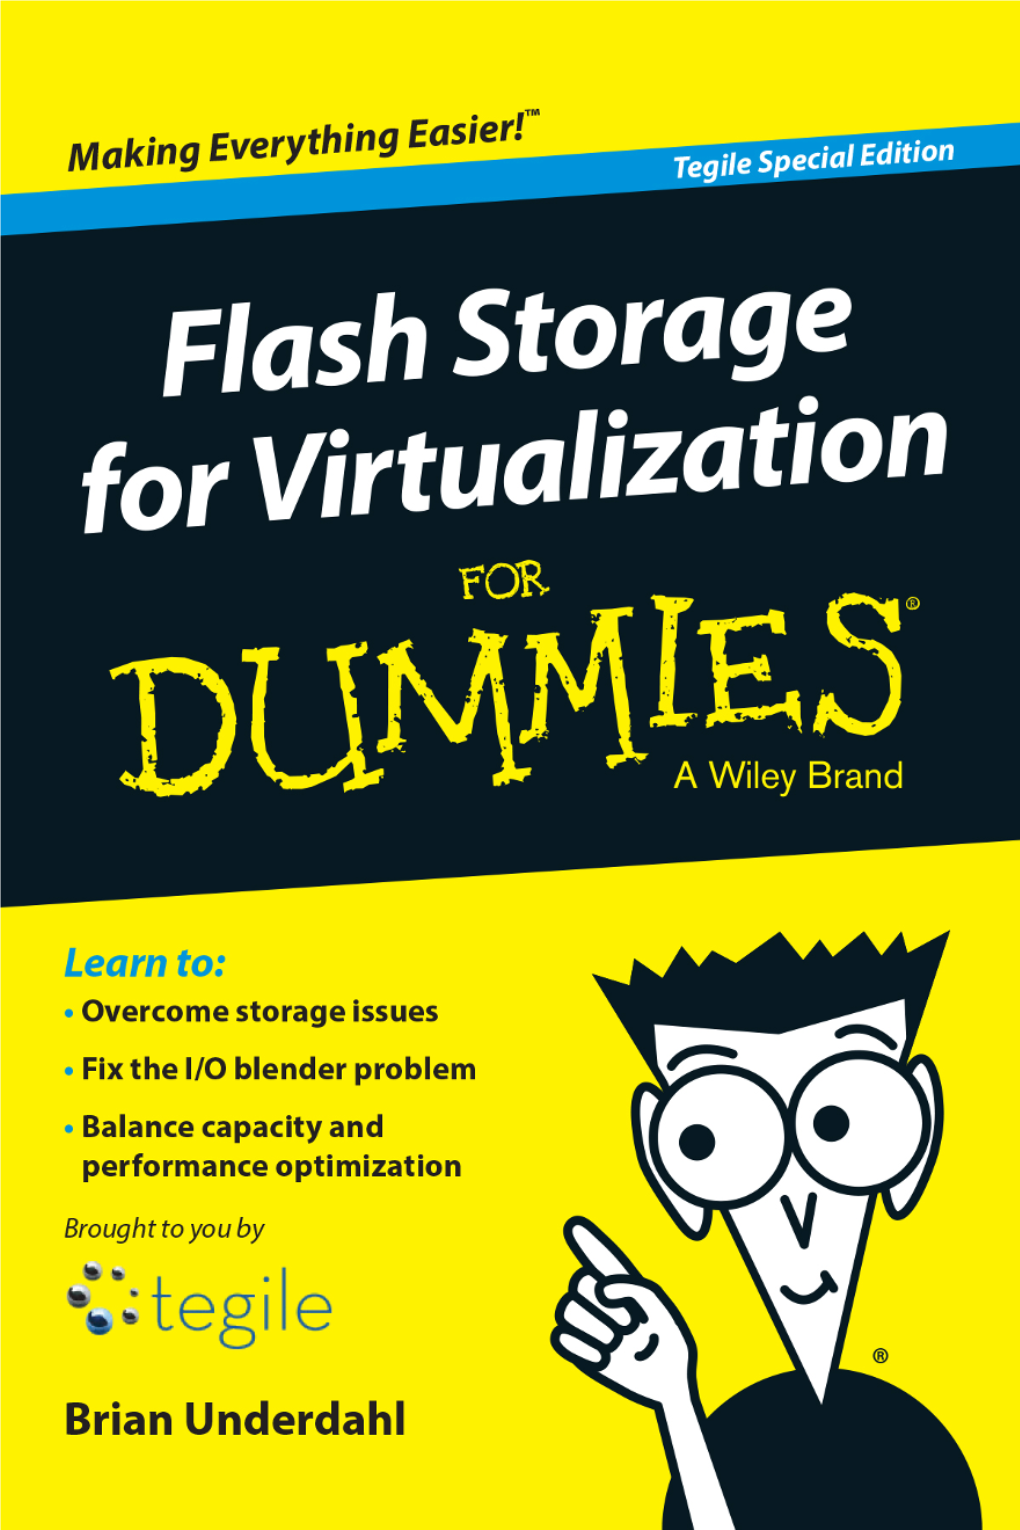 Flash Storage for Virtualization for Dummies ®, Tegile Special Edition Published by John Wiley & Sons, Inc